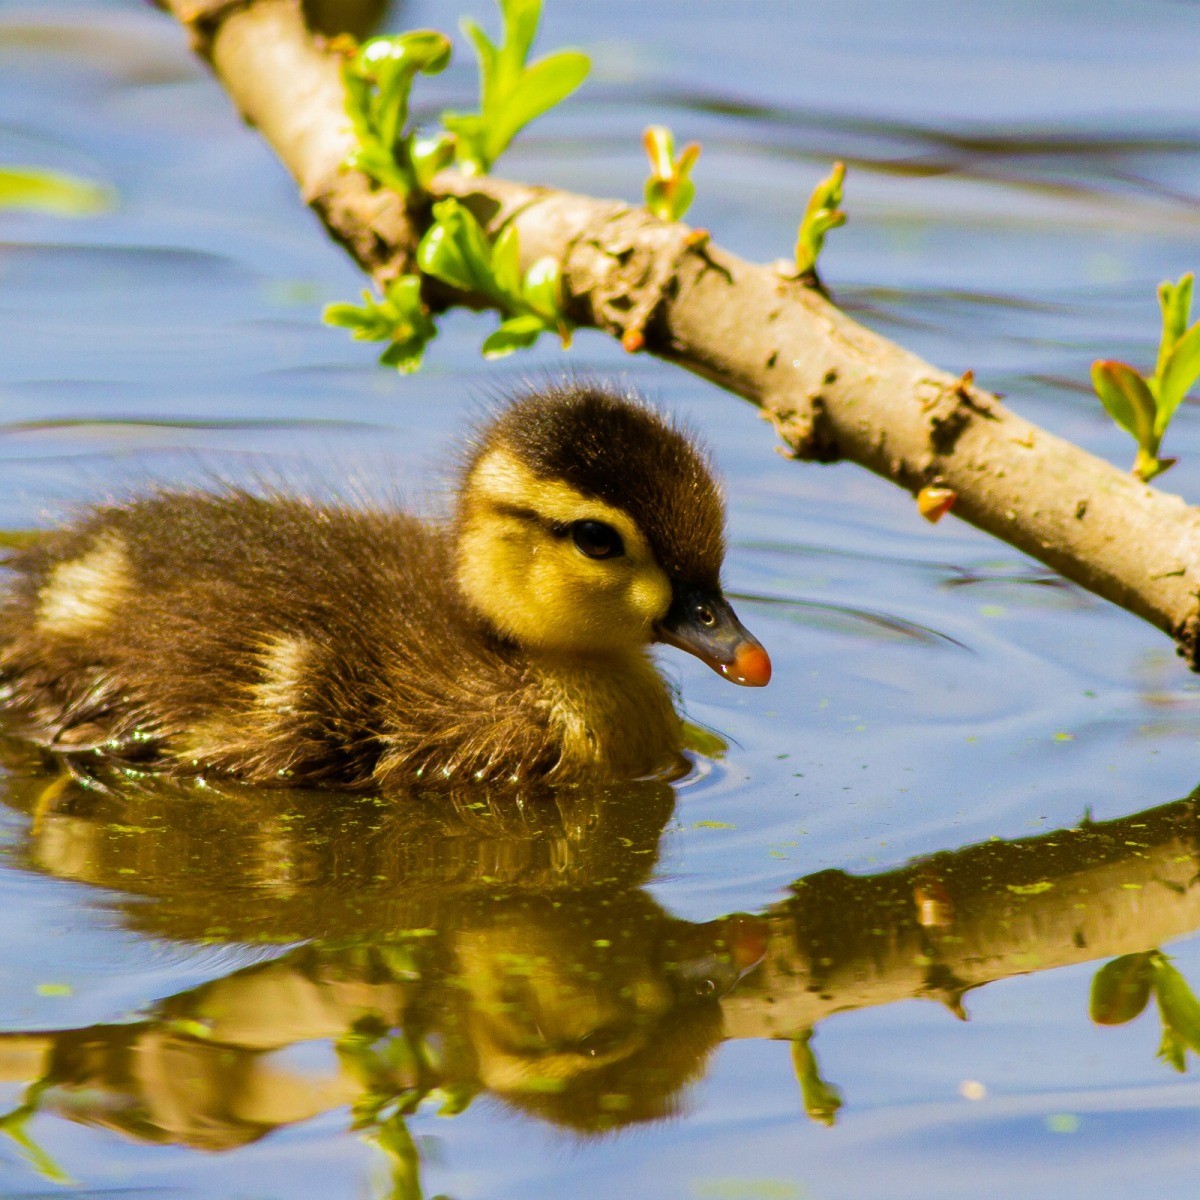 How to take care of ducklings information